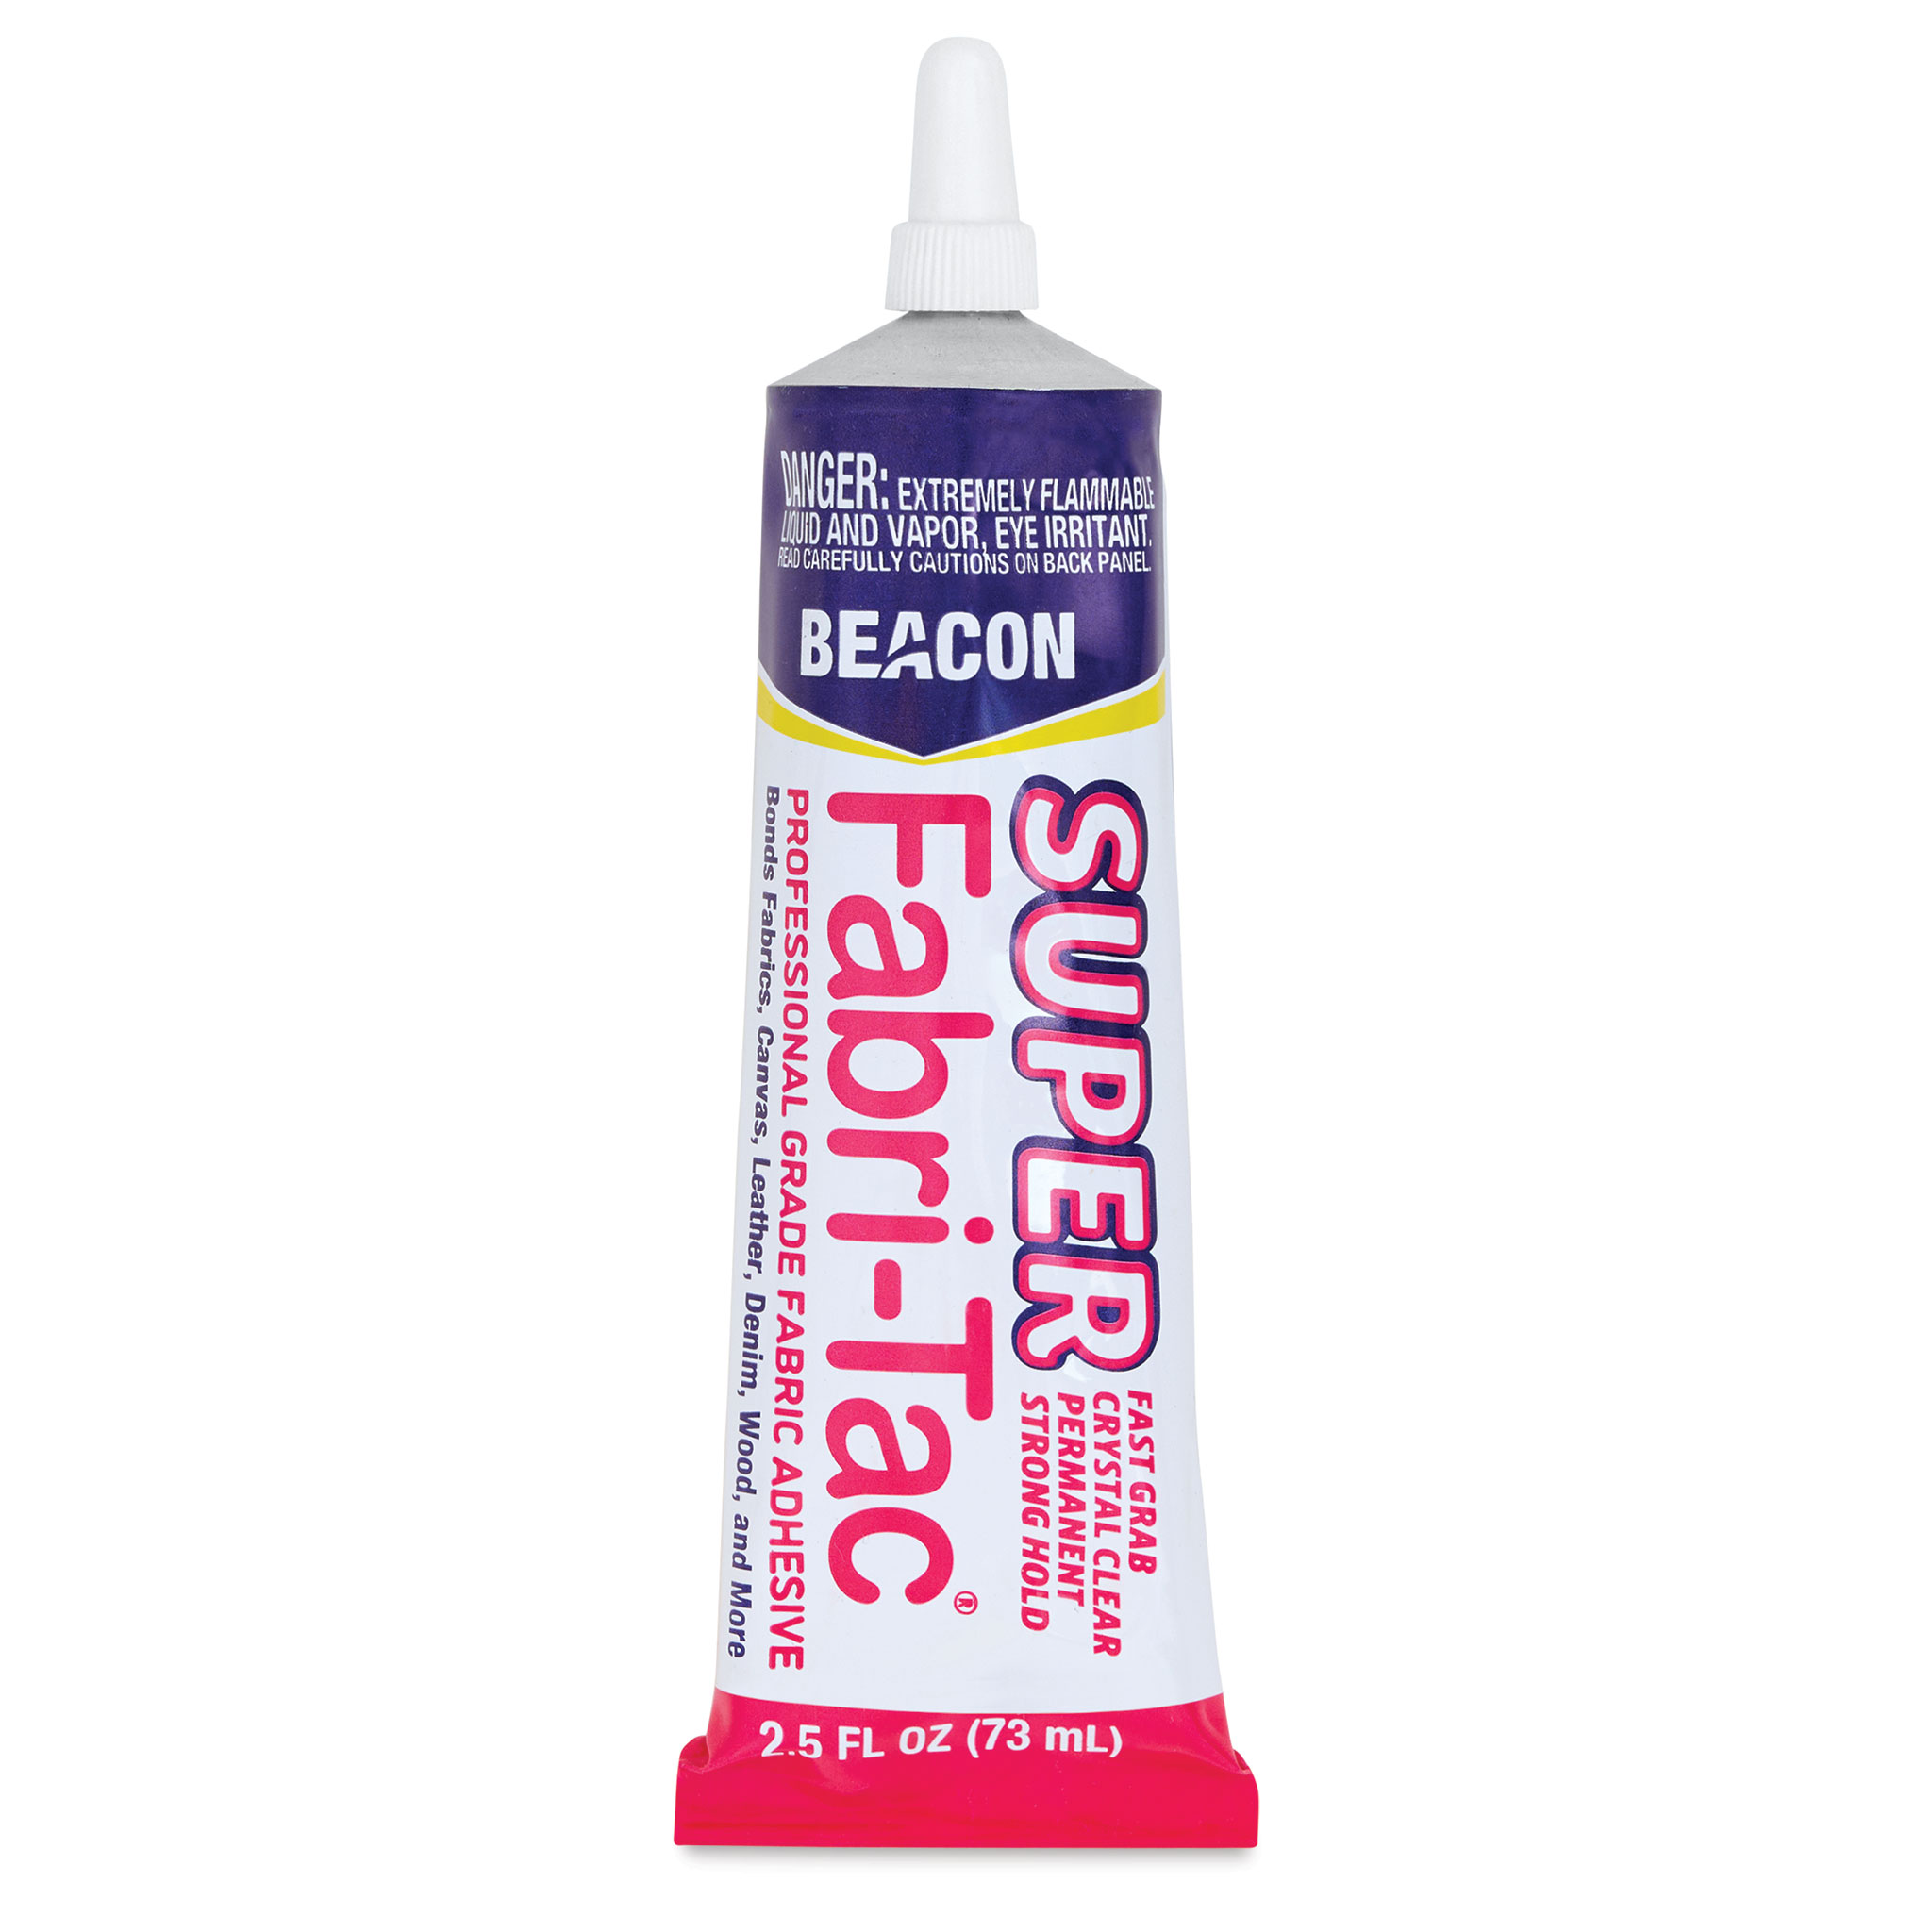 Beacon Fabri-Tac Premium Fabric Glue - Quick Drying, Crystal Clear, Permanent - for Fabrics, Canvas, Lace, Wood and More, 2-Ounce, 12-Pack